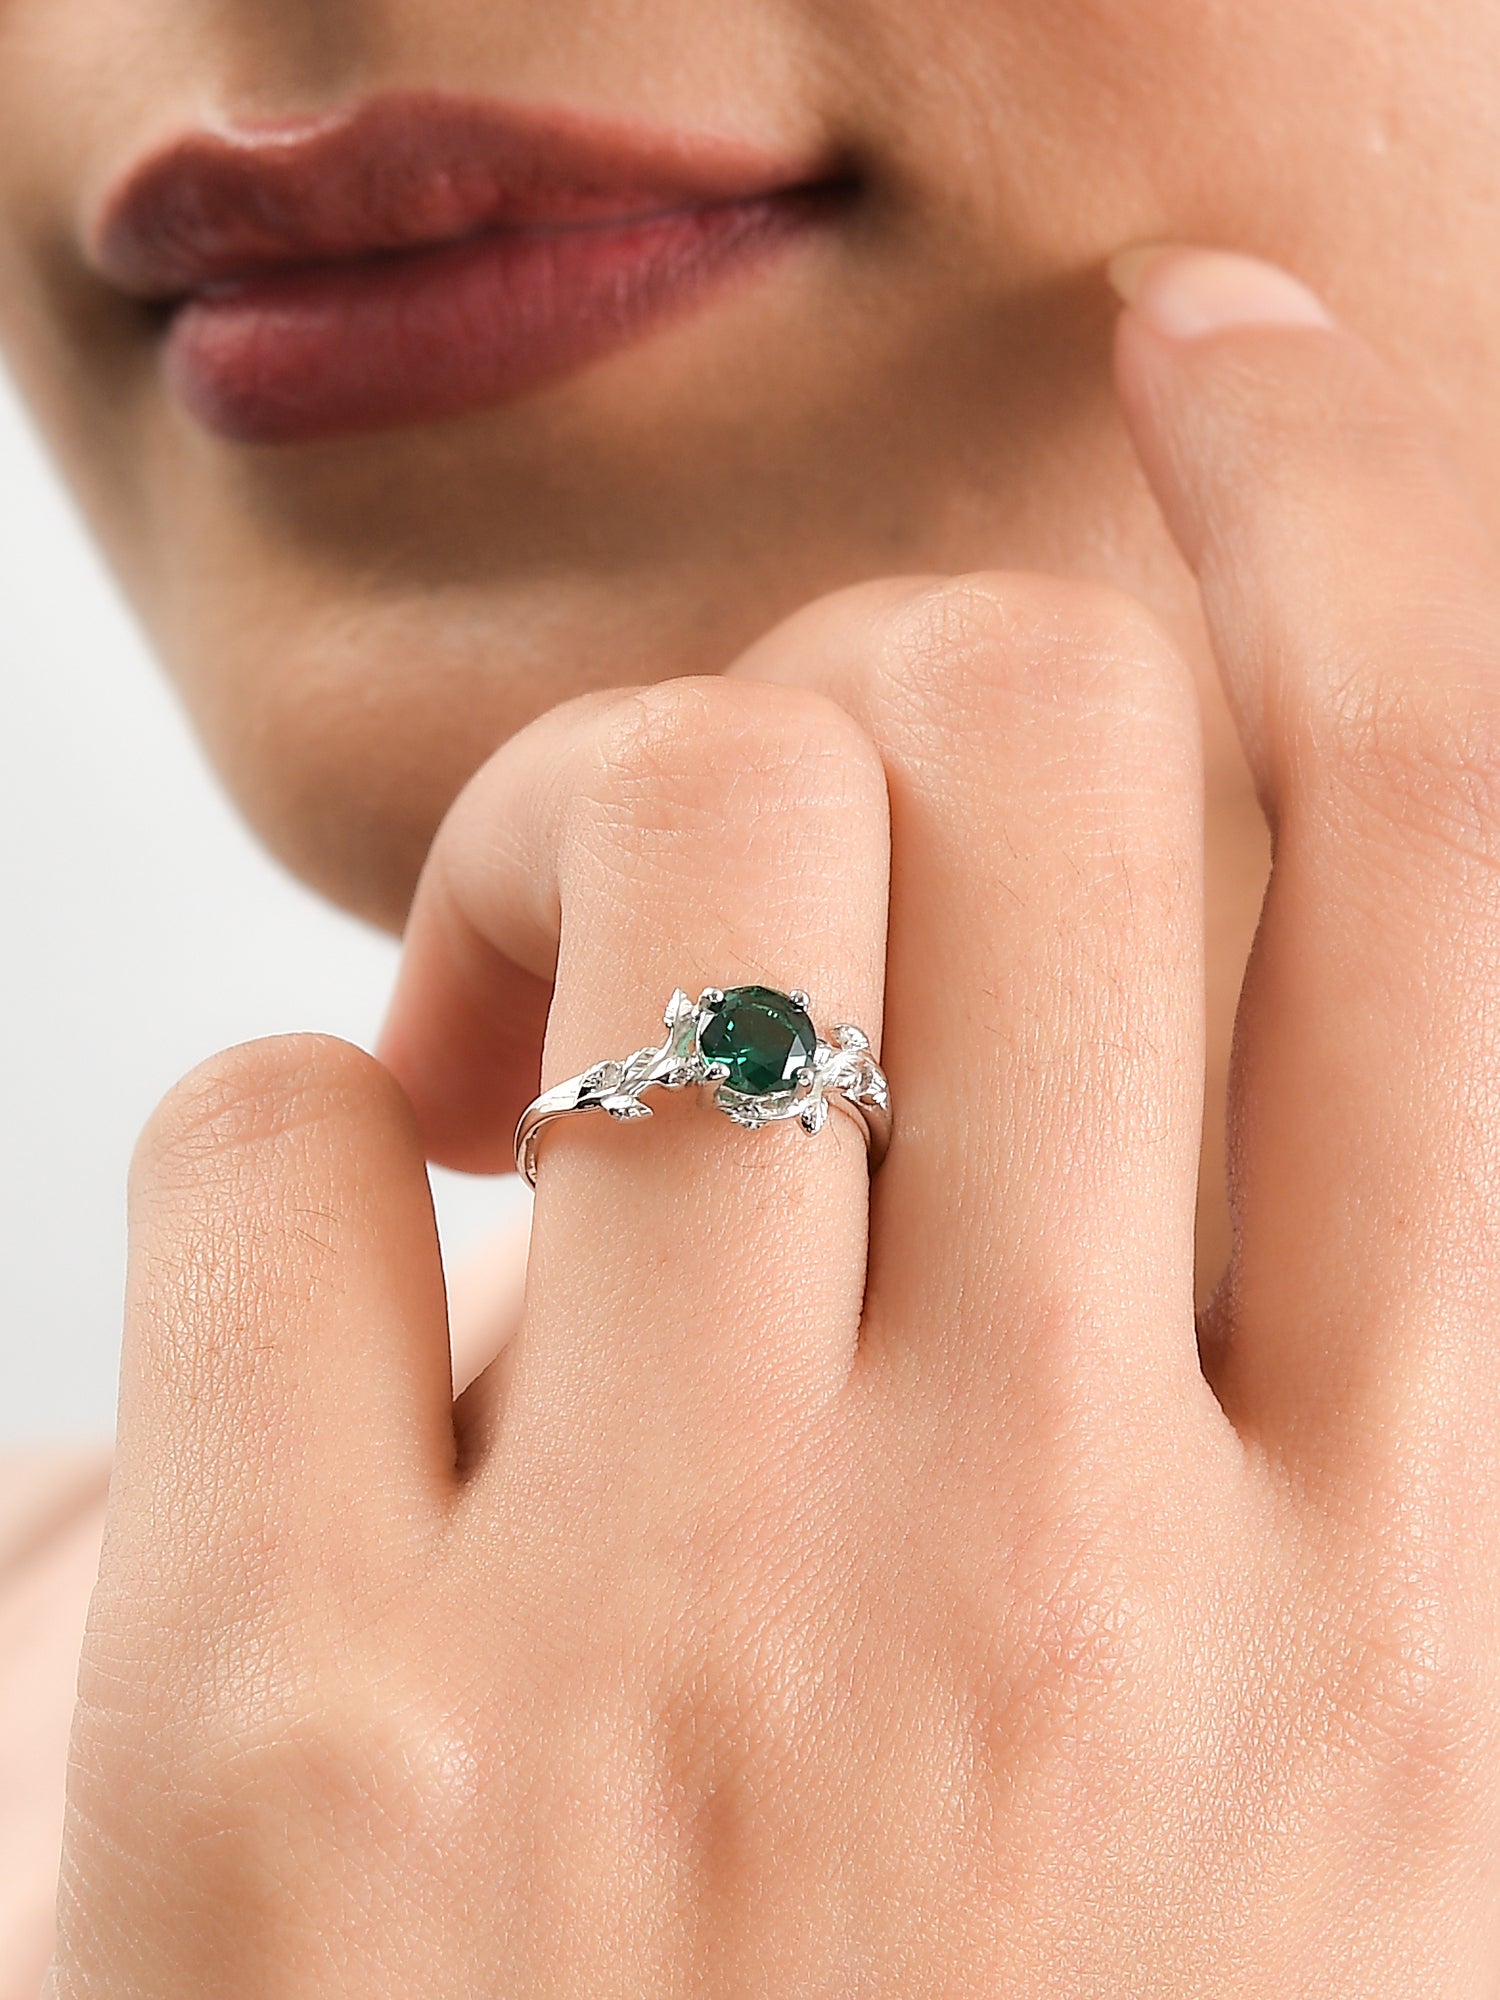 Vintage Emerald Ring In 925 Silver